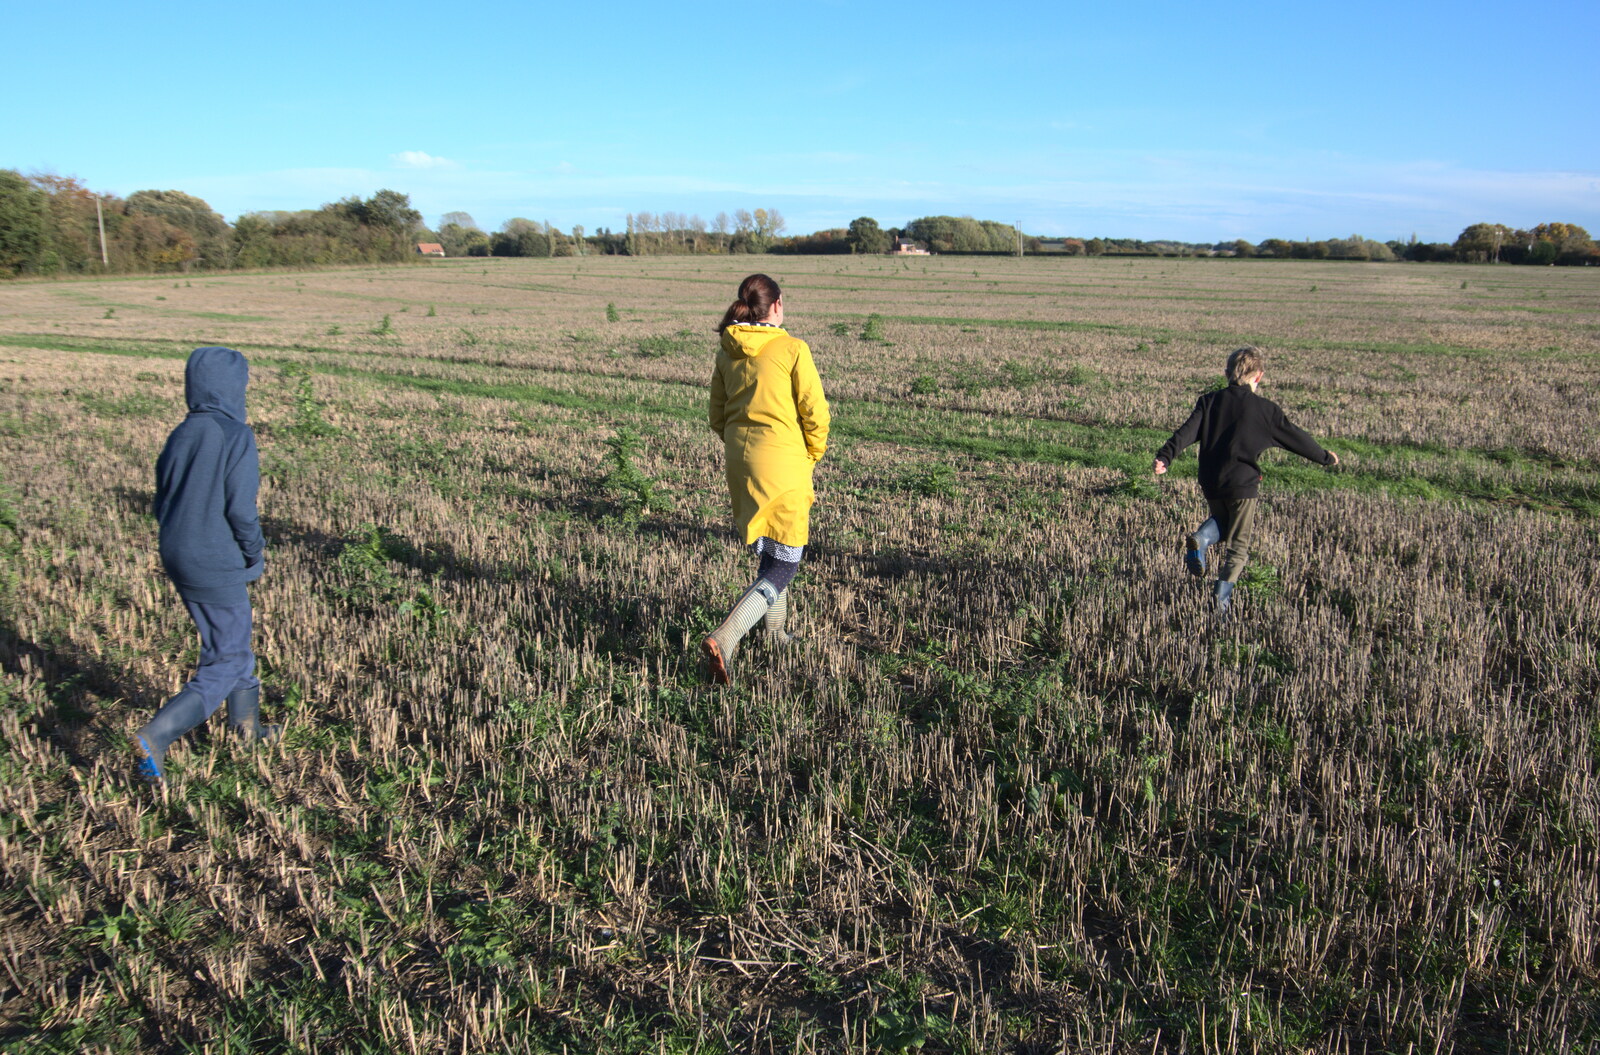 We walk across the stubble of the 100-acre field from A Walk Around the Avenue, Brome, Suffolk - 25th October 2020